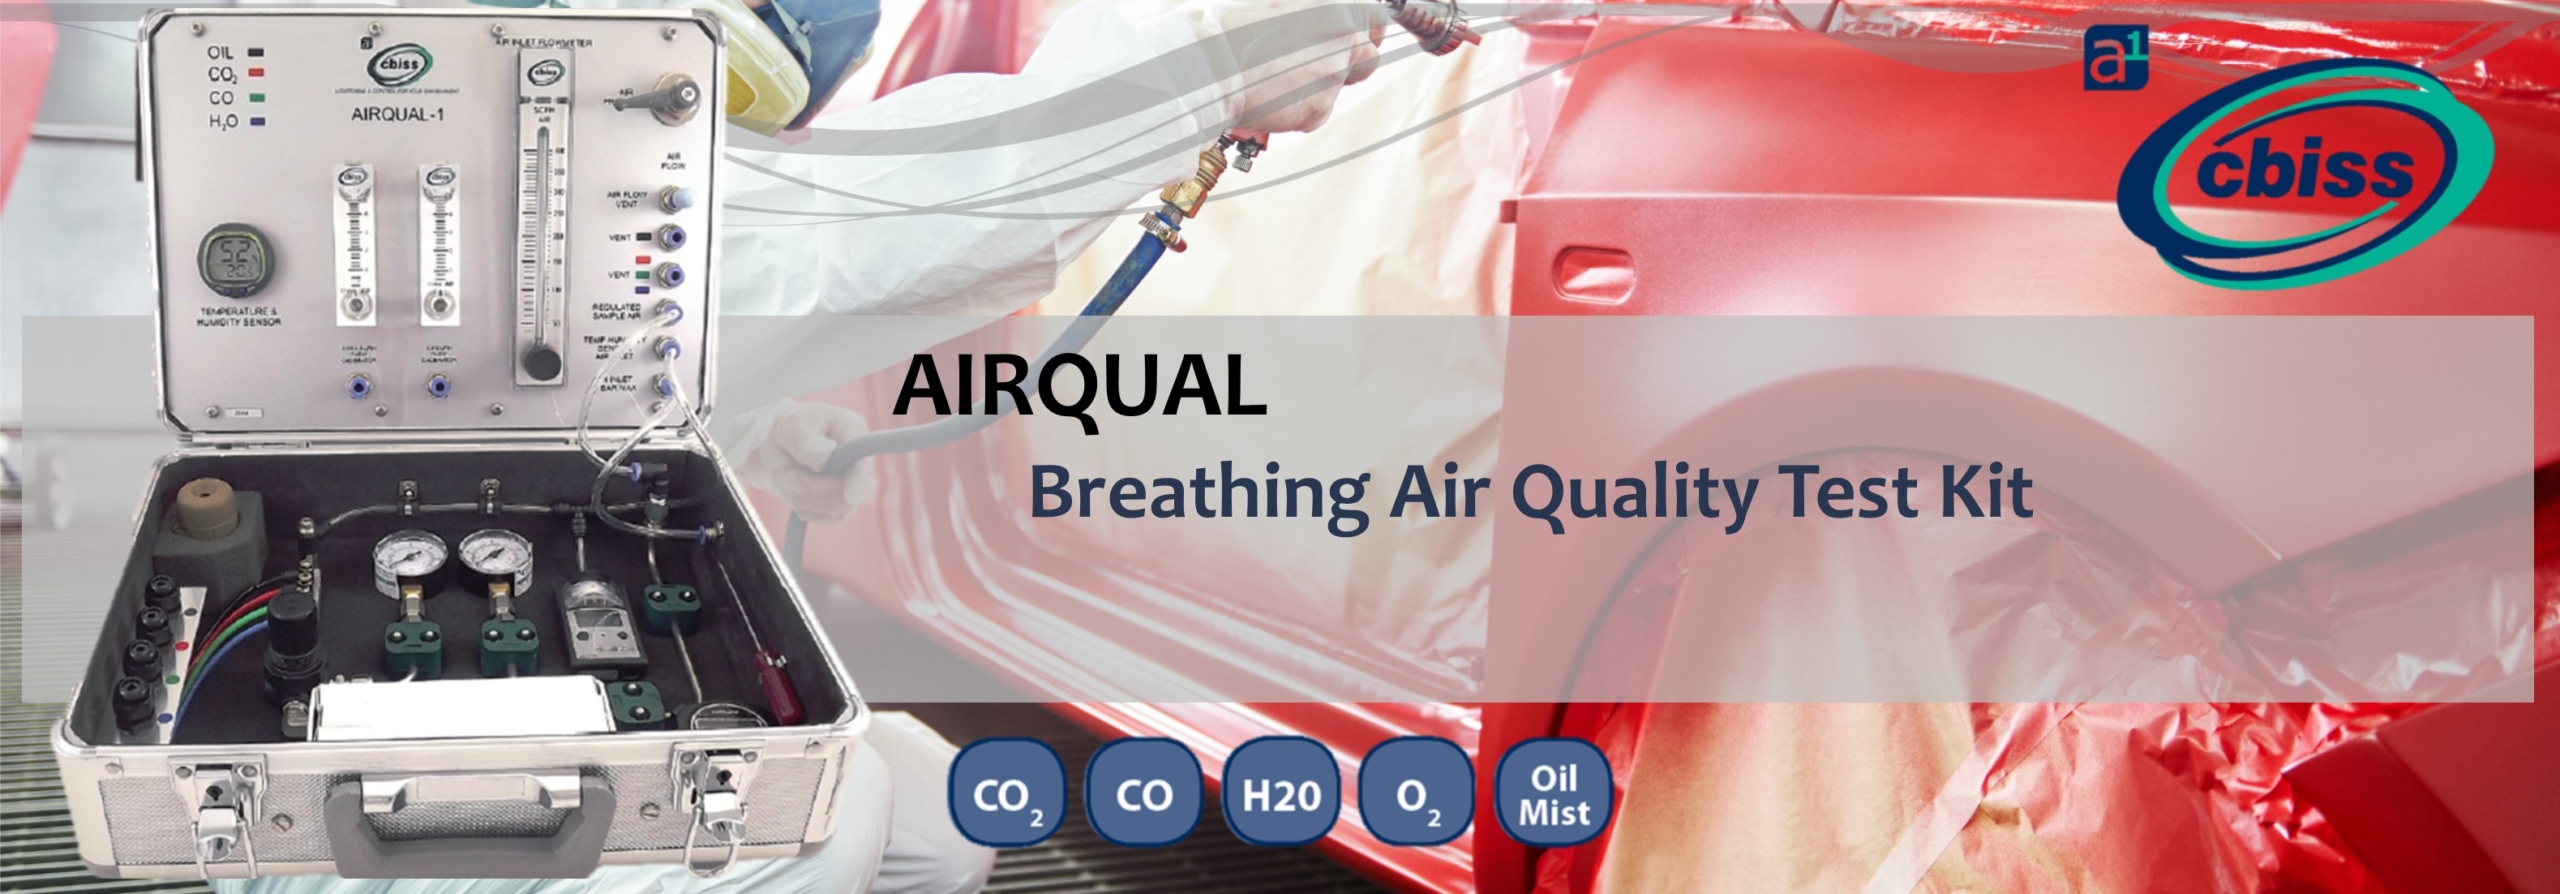 https://www.aquagas.com.au/wp-content/uploads/2015/07/airqual-breathing-air-quality-test-kit-scaled.jpg